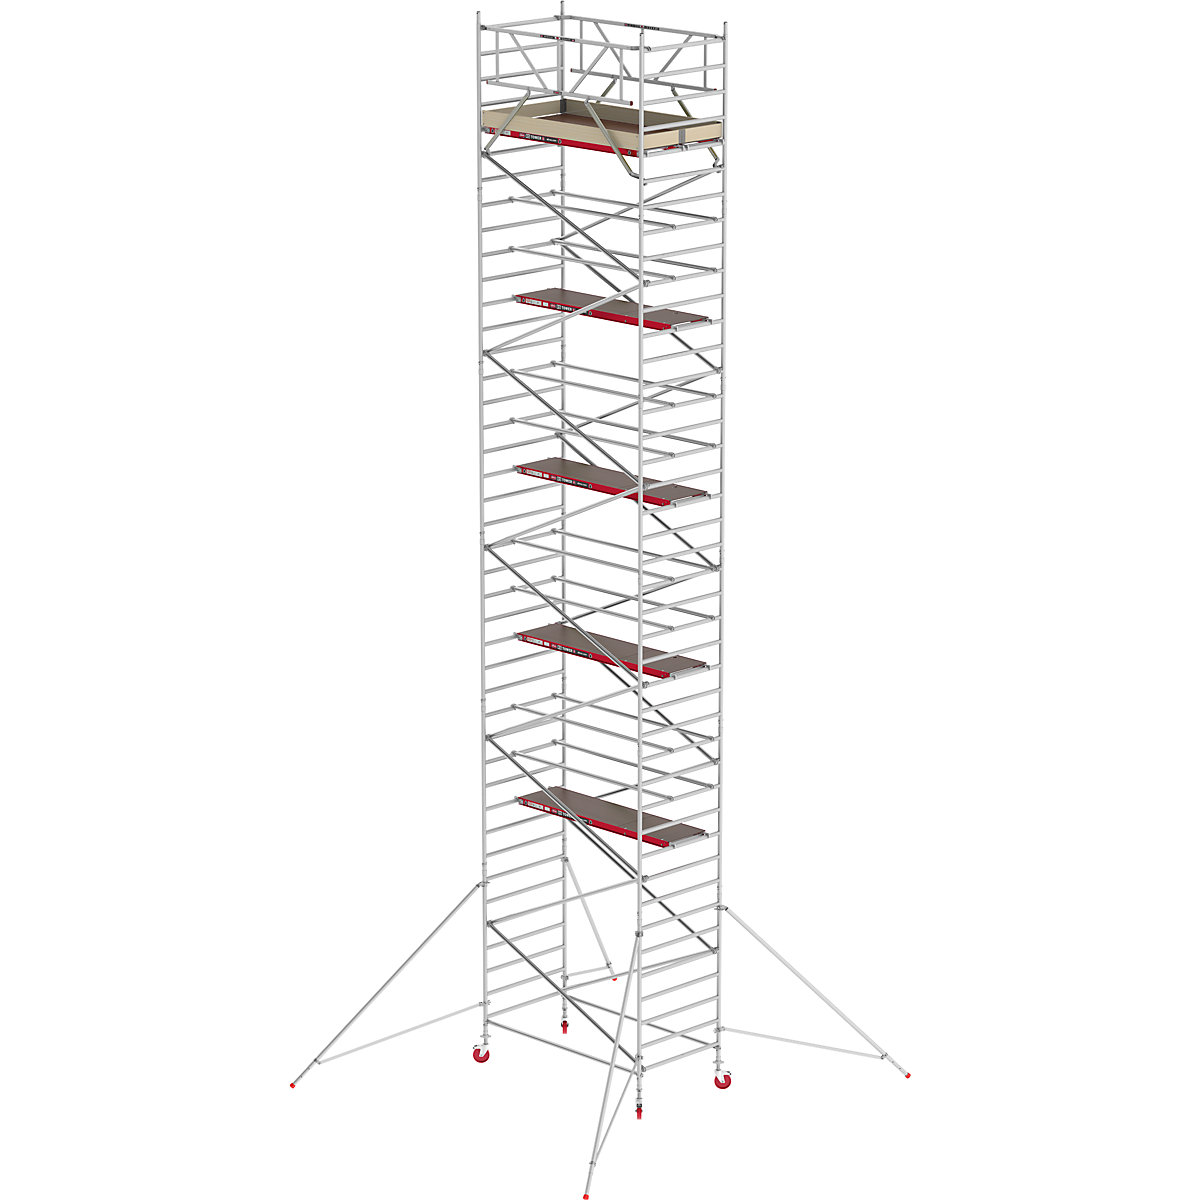 RS TOWER 42 wide mobile access tower – Altrex, wooden platform, length 1.85 m, working height 13.20 m-2